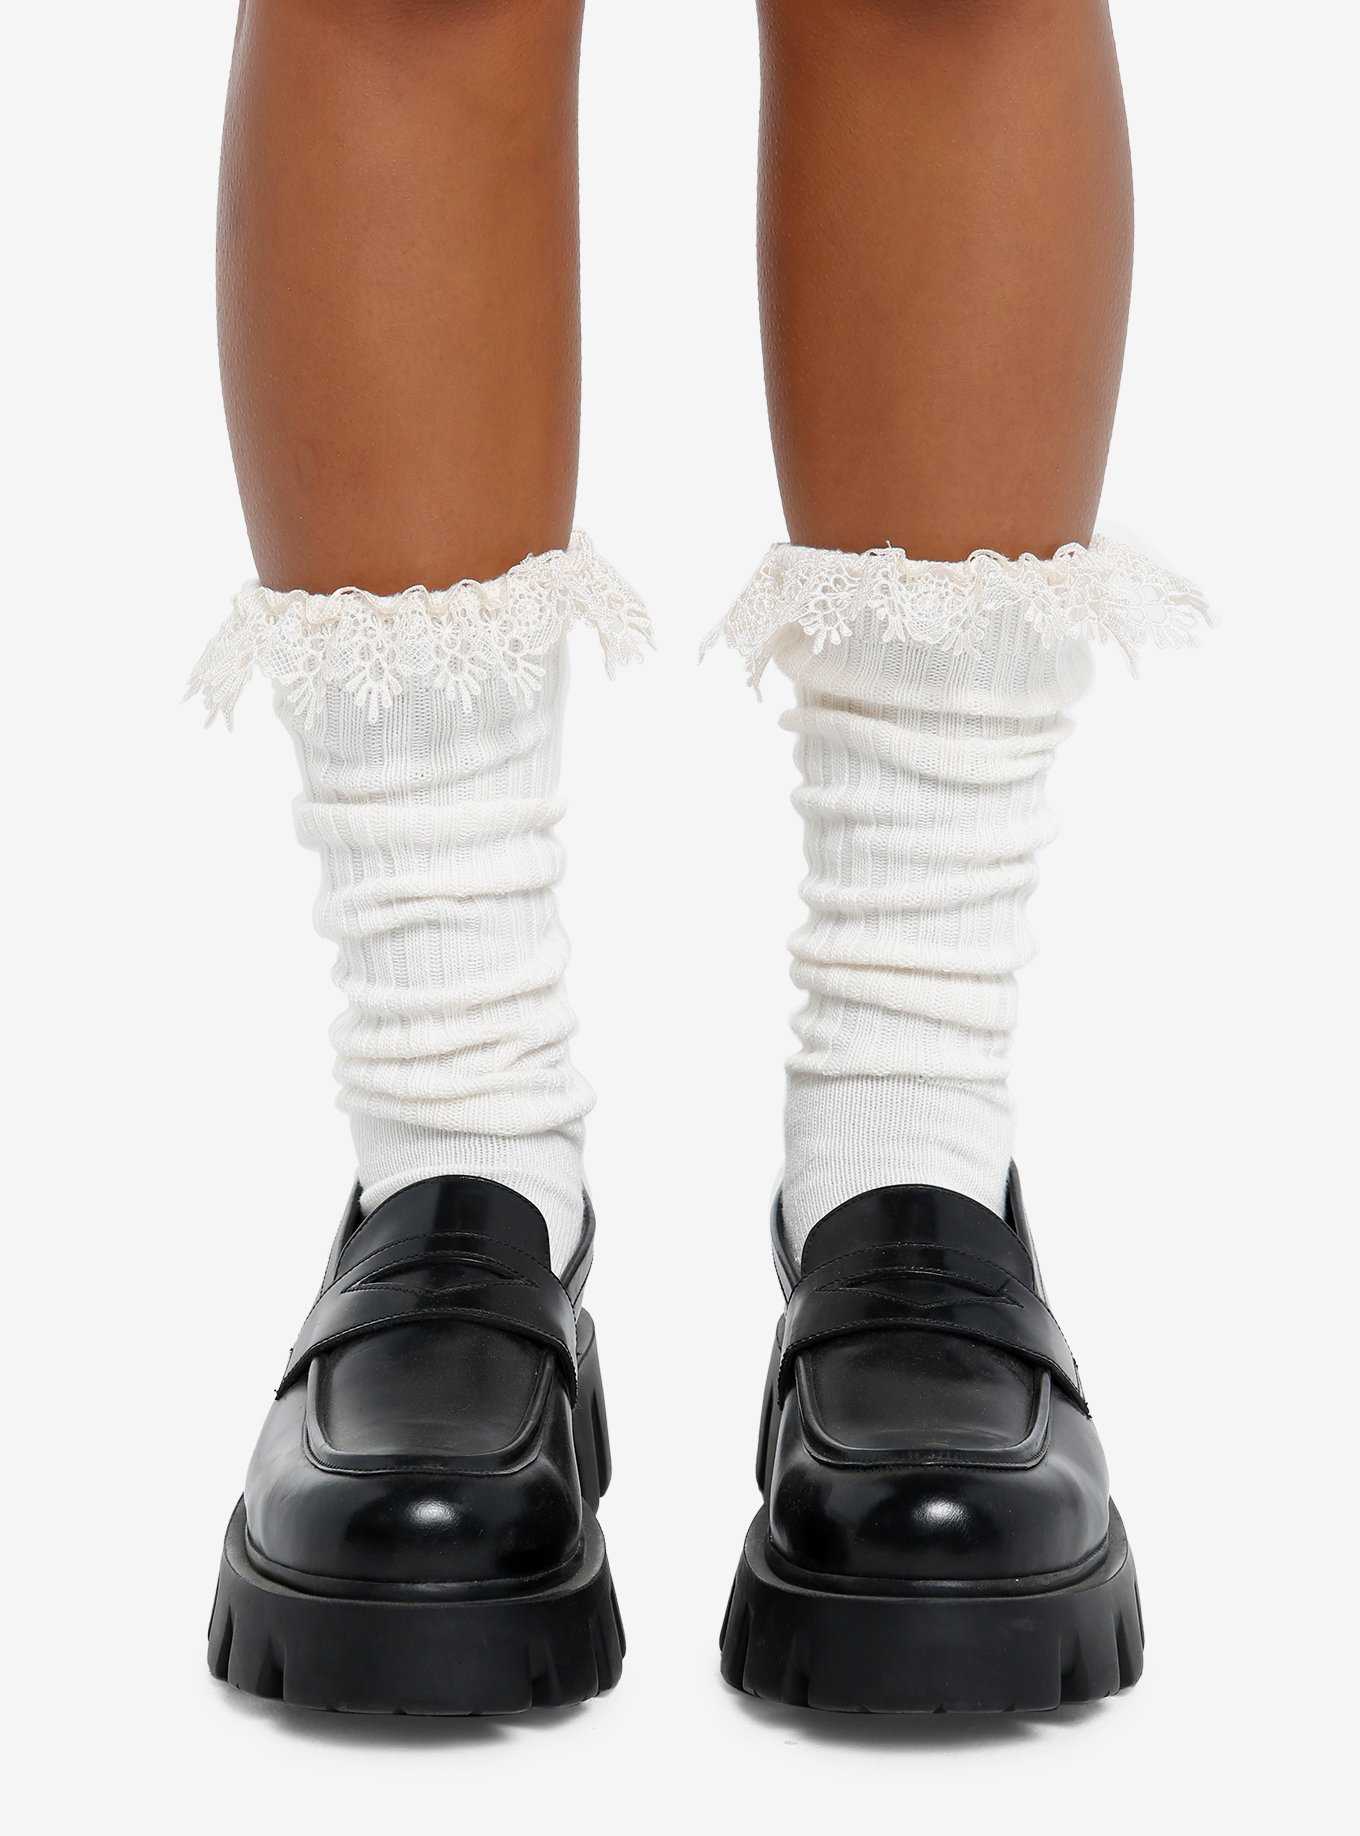 Cream Lace Slouch Knee-High Socks, , hi-res